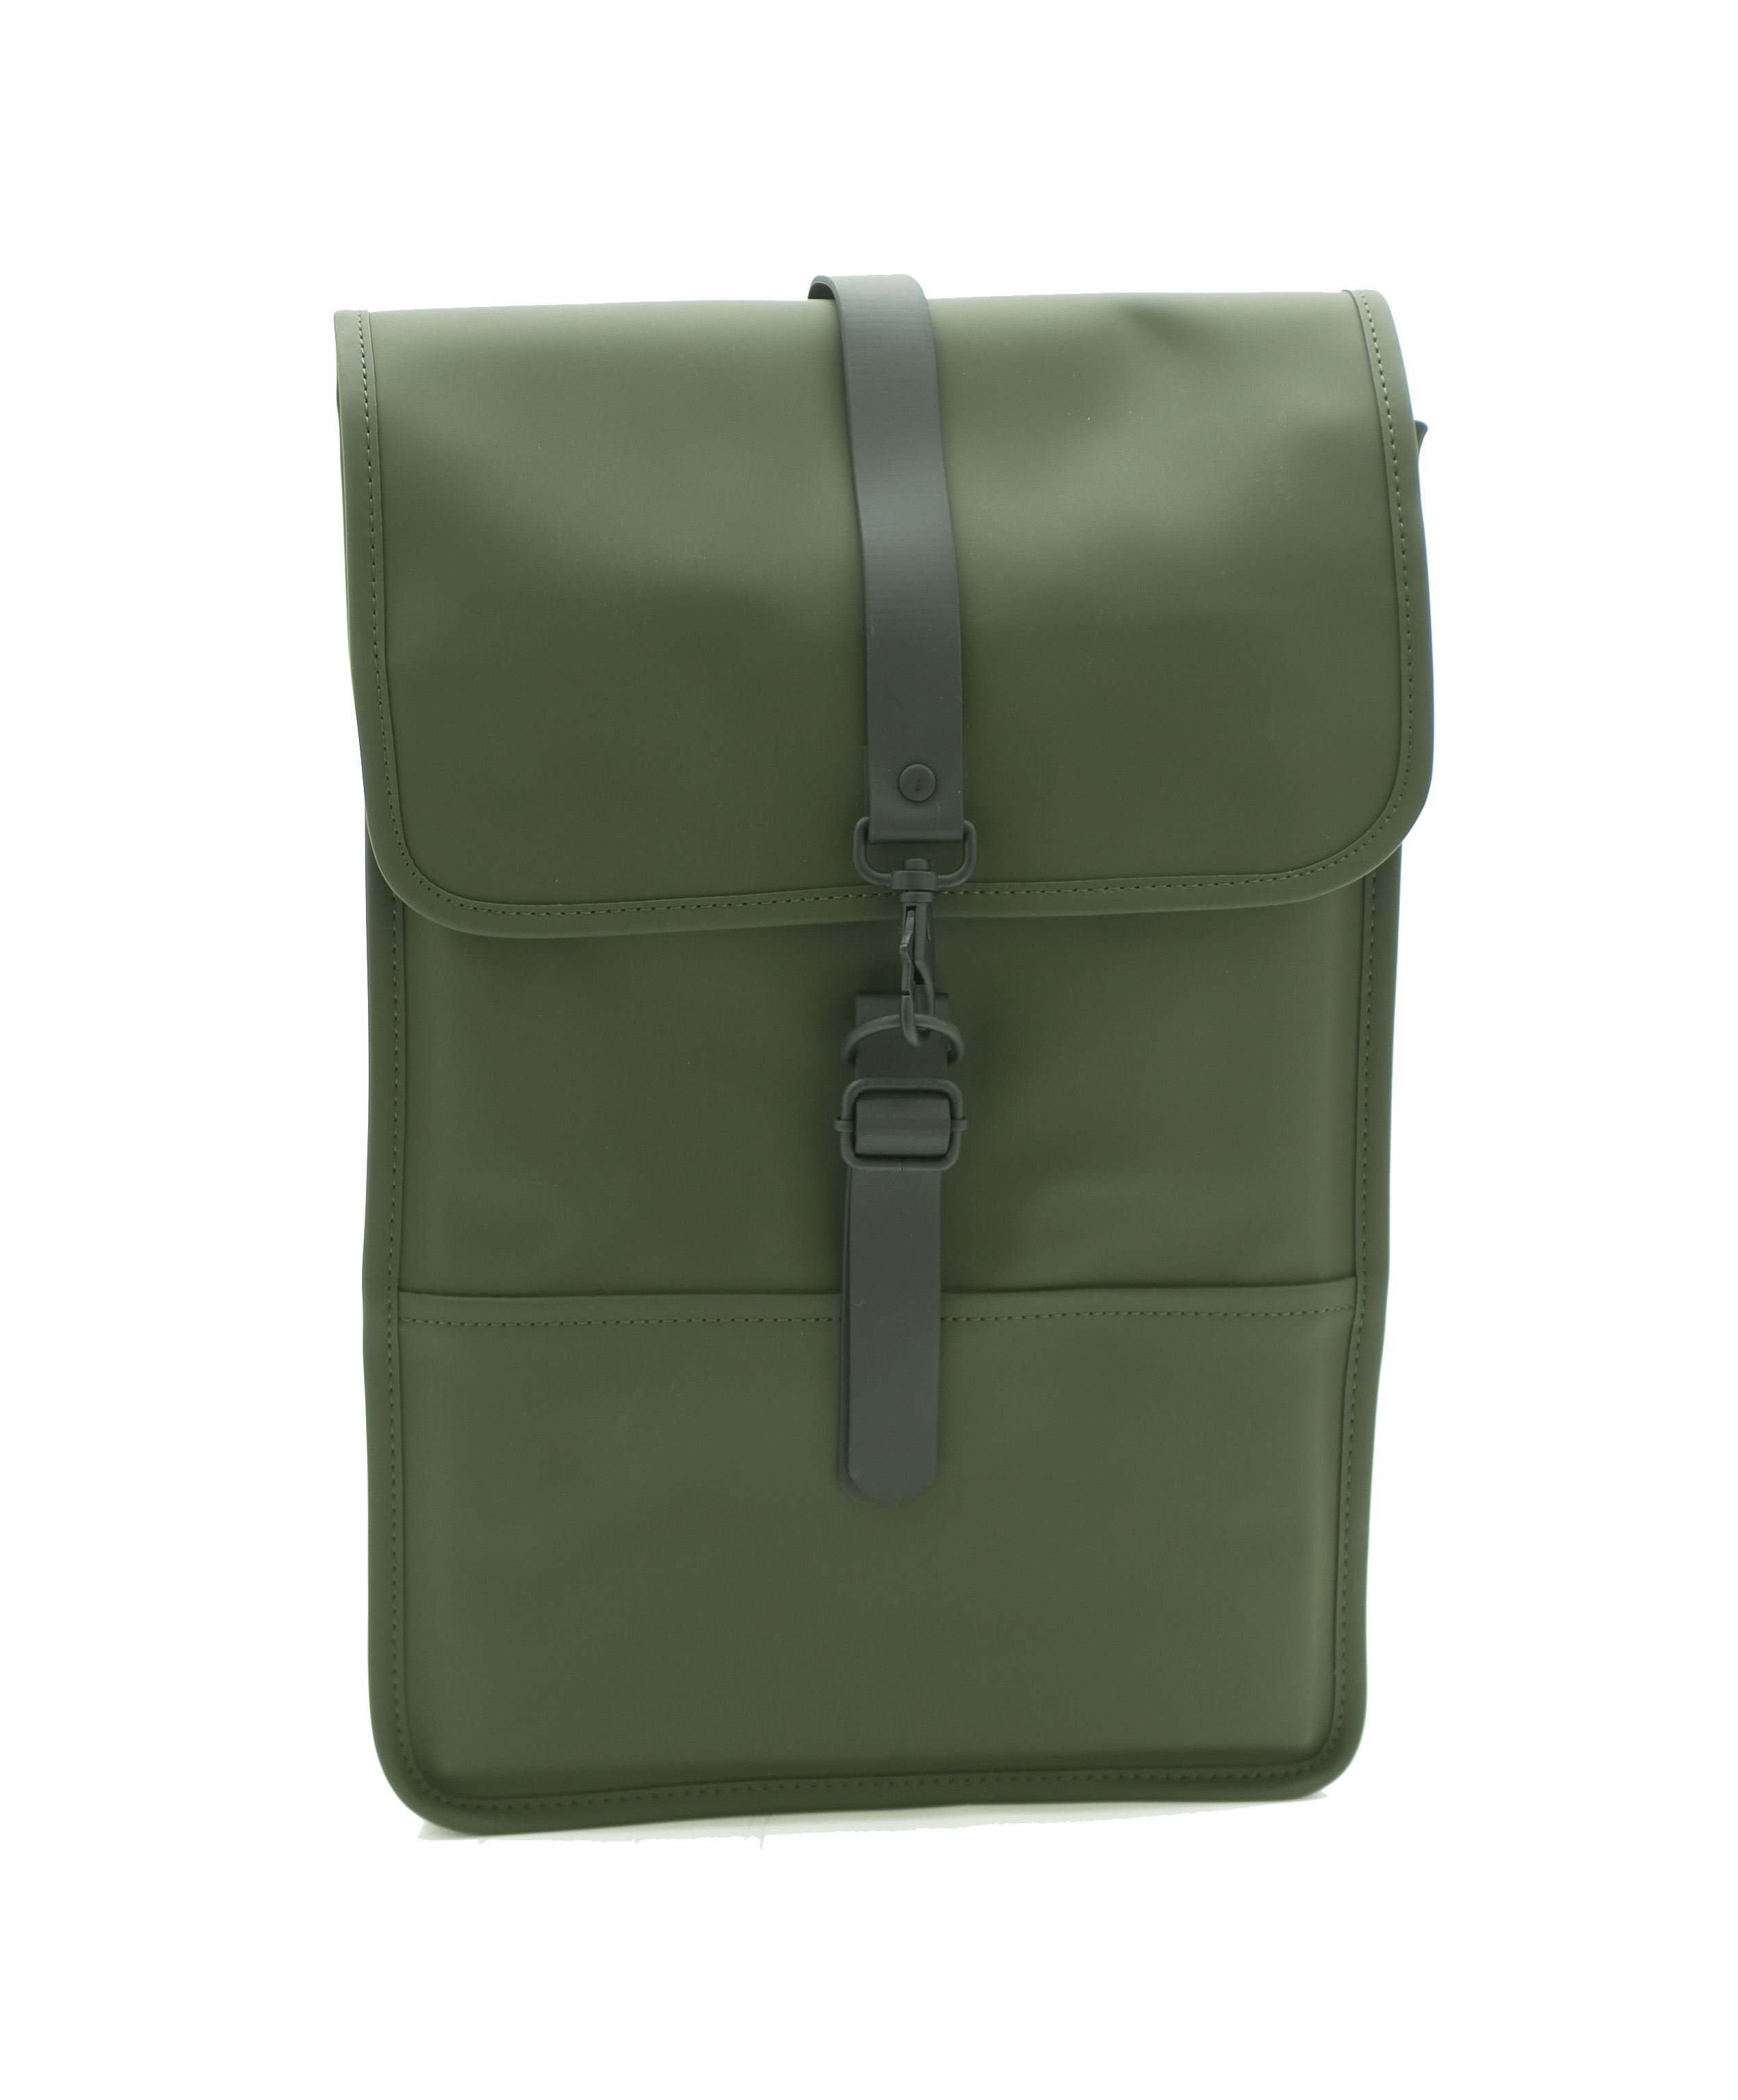 Picture of Green Backpack